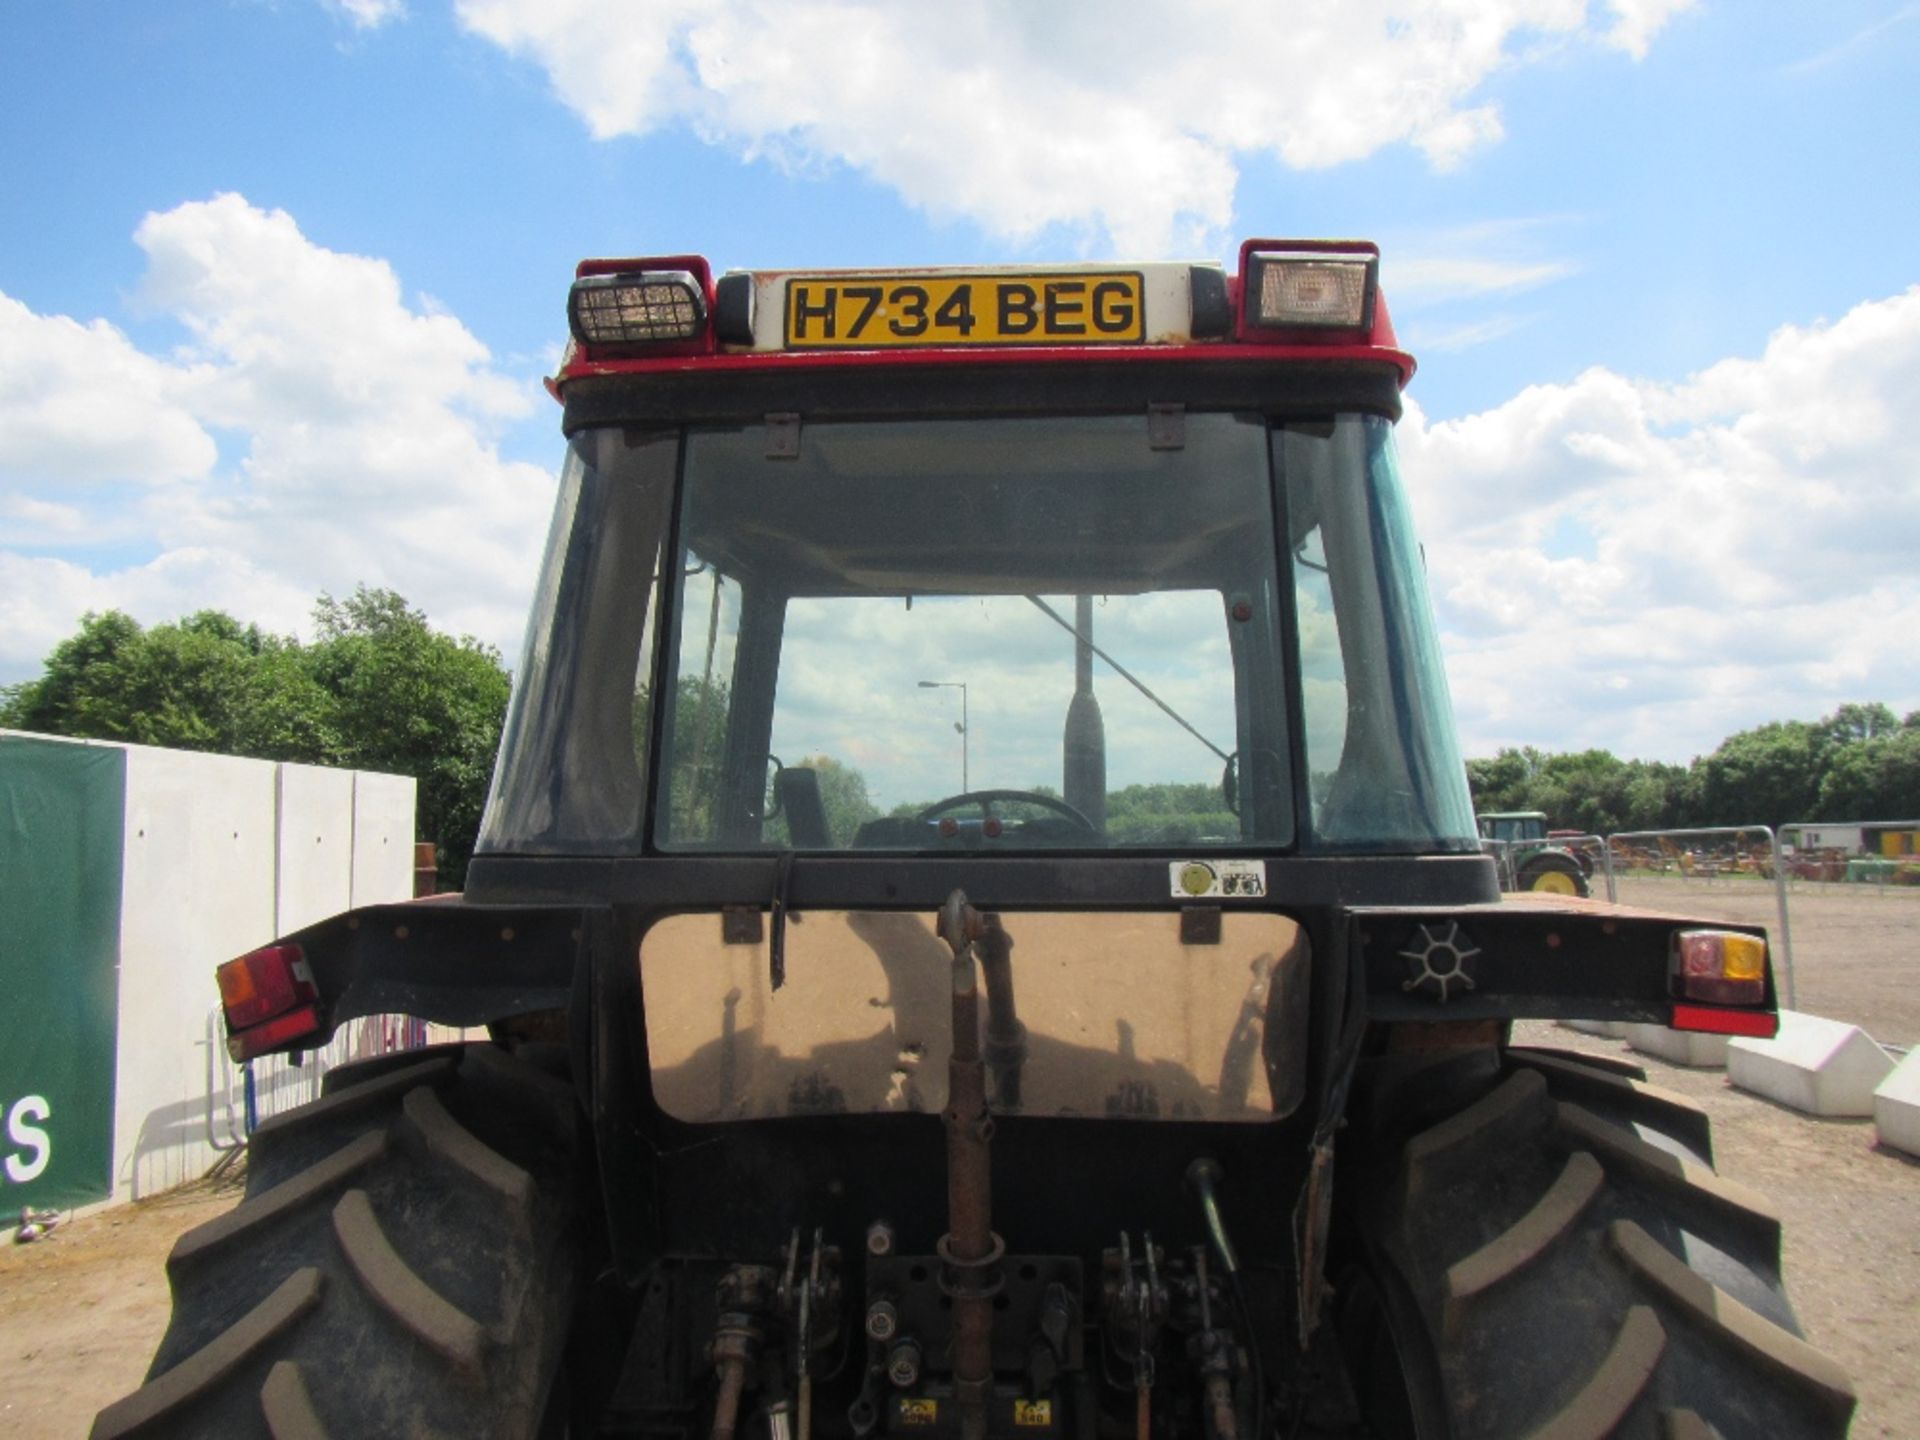 Case 844XL 4wd Tractor c/w V5 Reg. No. H734 BEG Hours: 7,275 - Image 8 of 17